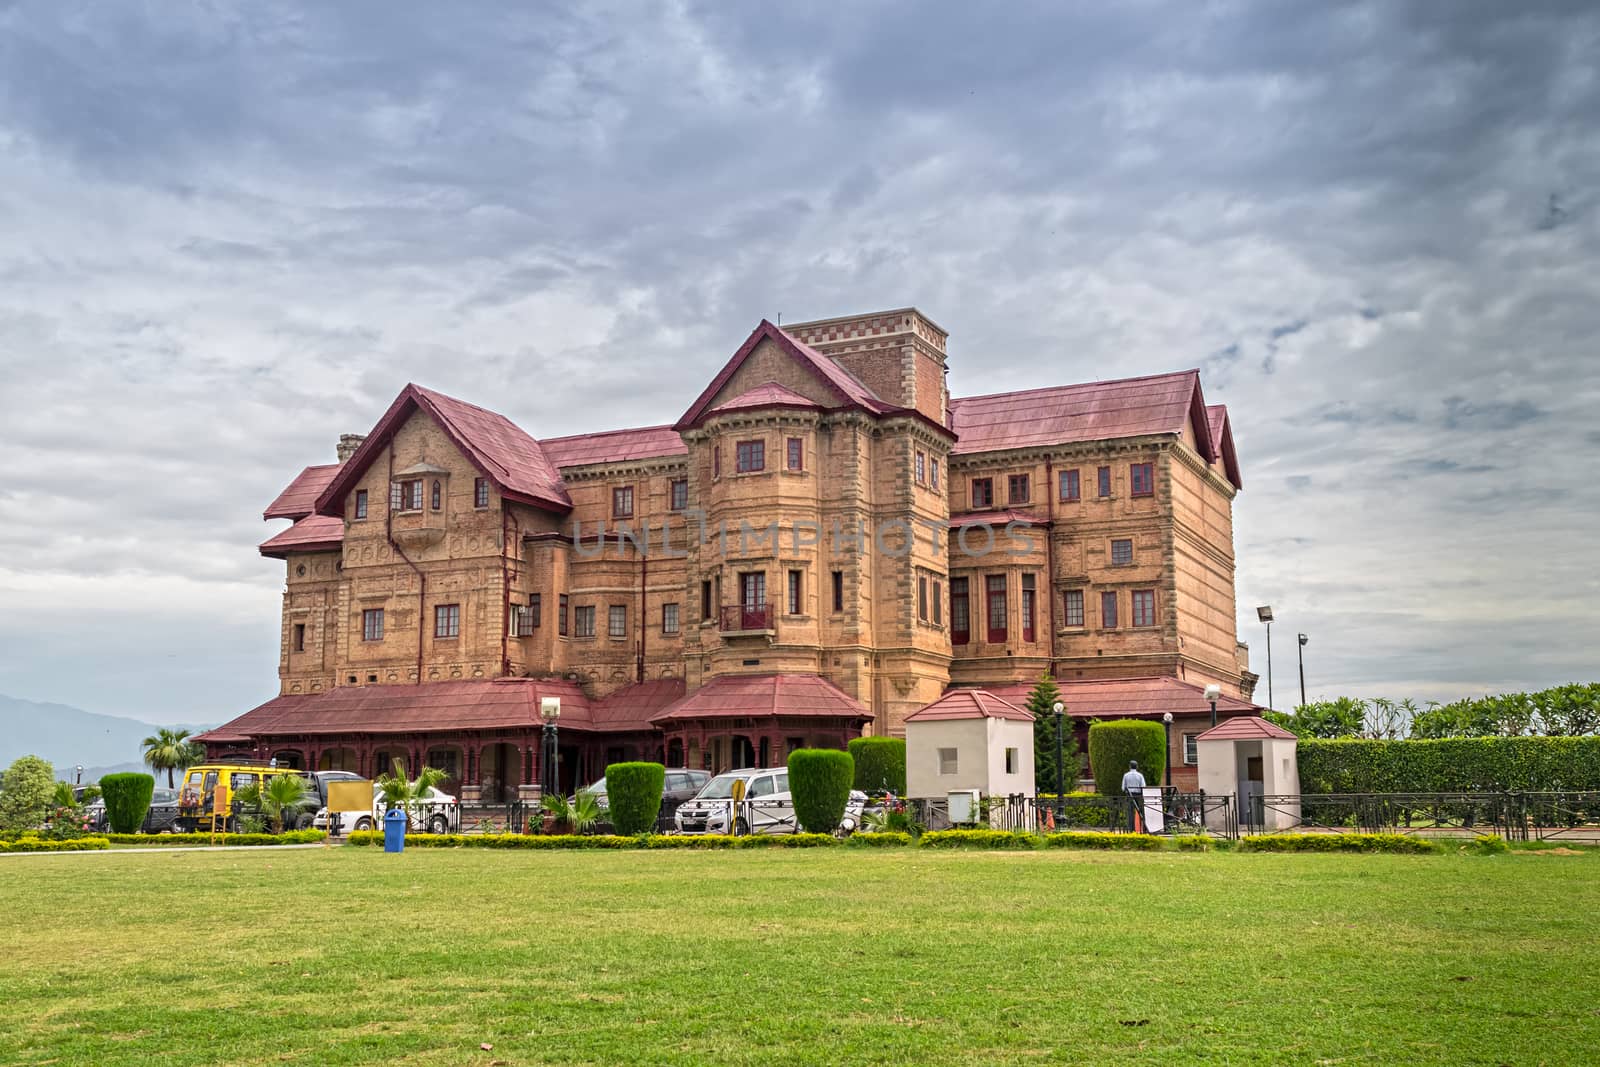 Amar Mahal Palace is a palace in Jammu that was built in the nineteenth century for Raja Amar Singh, a Dogra king by a French architect on the lines of a French Chateau.